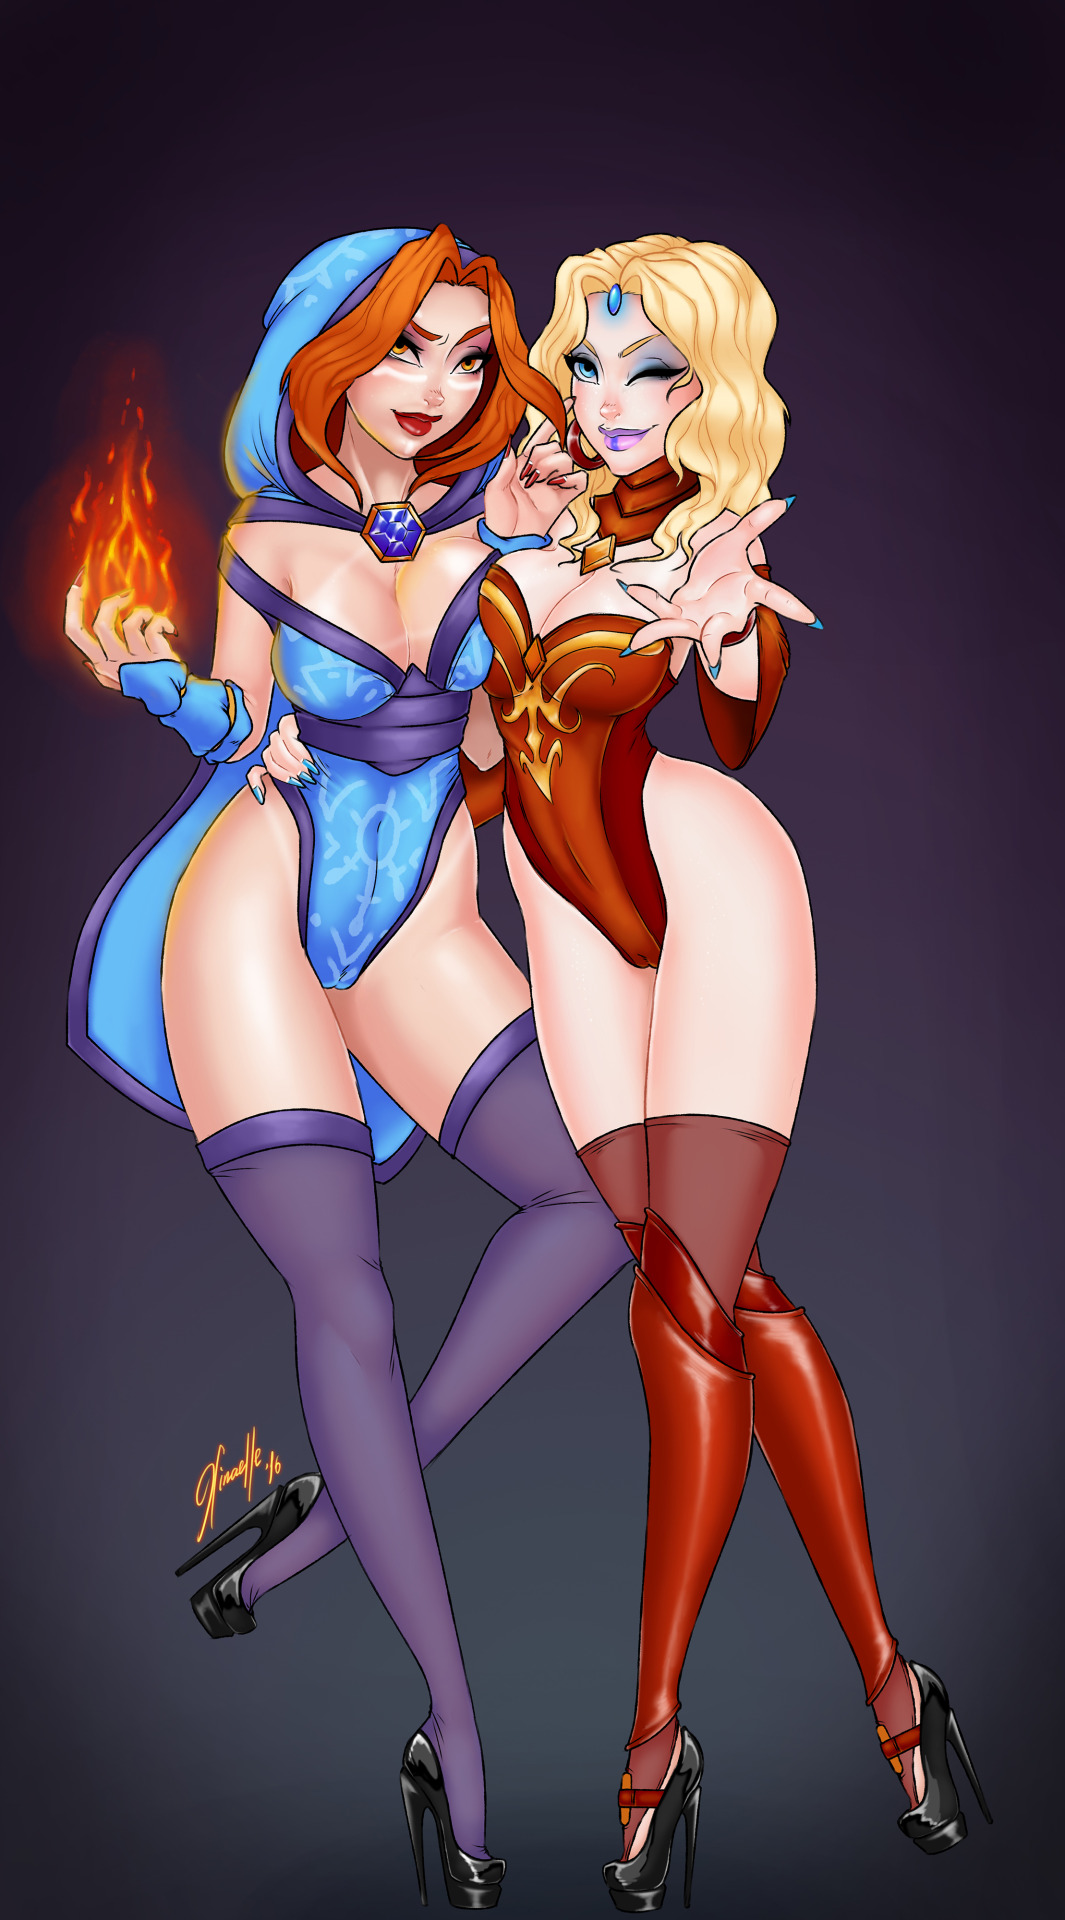 xinaelle-sfw:  Lovely Lina and Rylai ^3^   SFW versions &lt;3